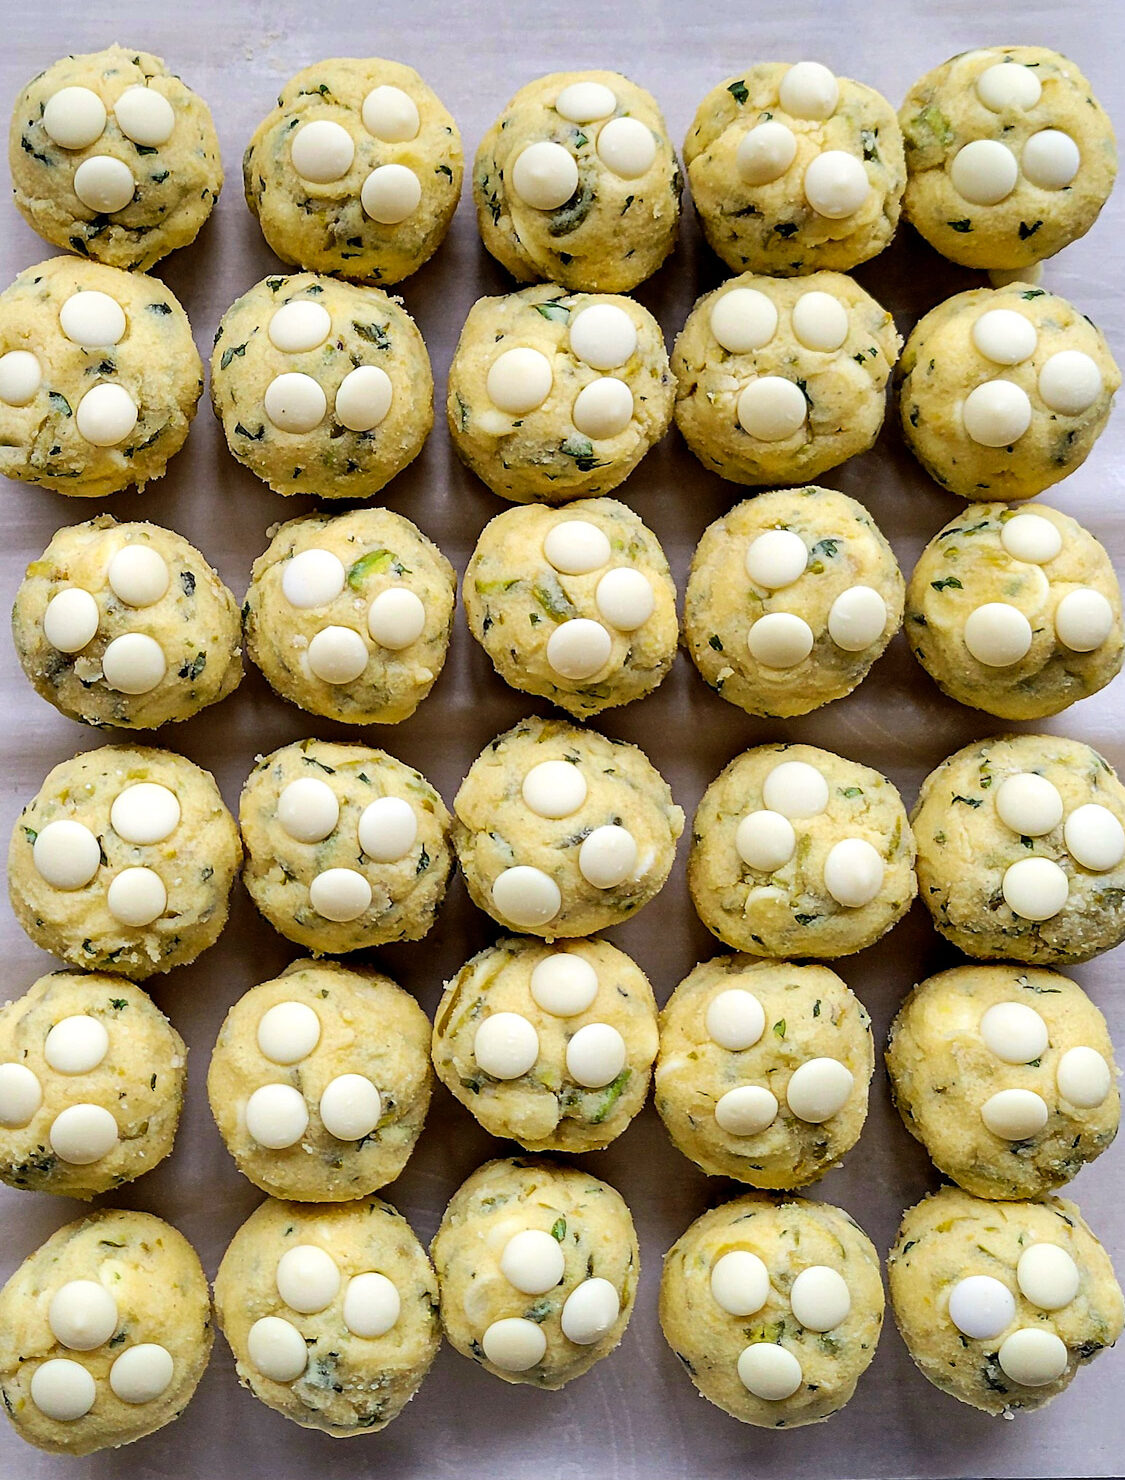 Lemon Basil Cookies with White Chocolate and Pistachios all rolled up and ready to bake.